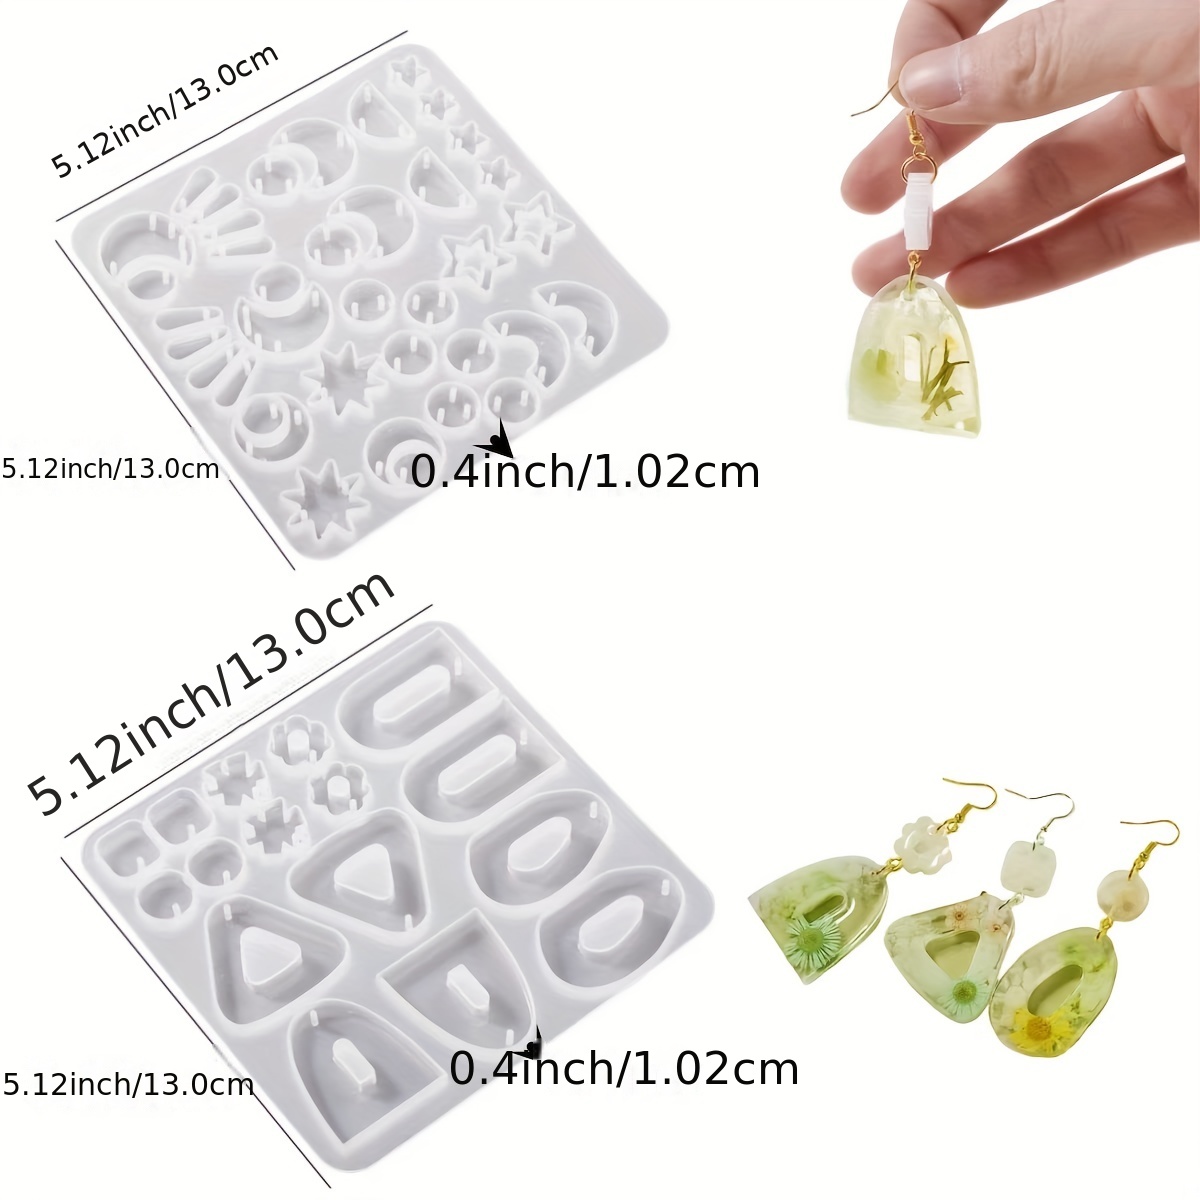 Resin Earring Mold Silicone-2PCS Earring molds for Epoxy Resin Casting of  Arched with Hole,DIY Resin Jewelry Molds for Pendant, Earrings, Necklace